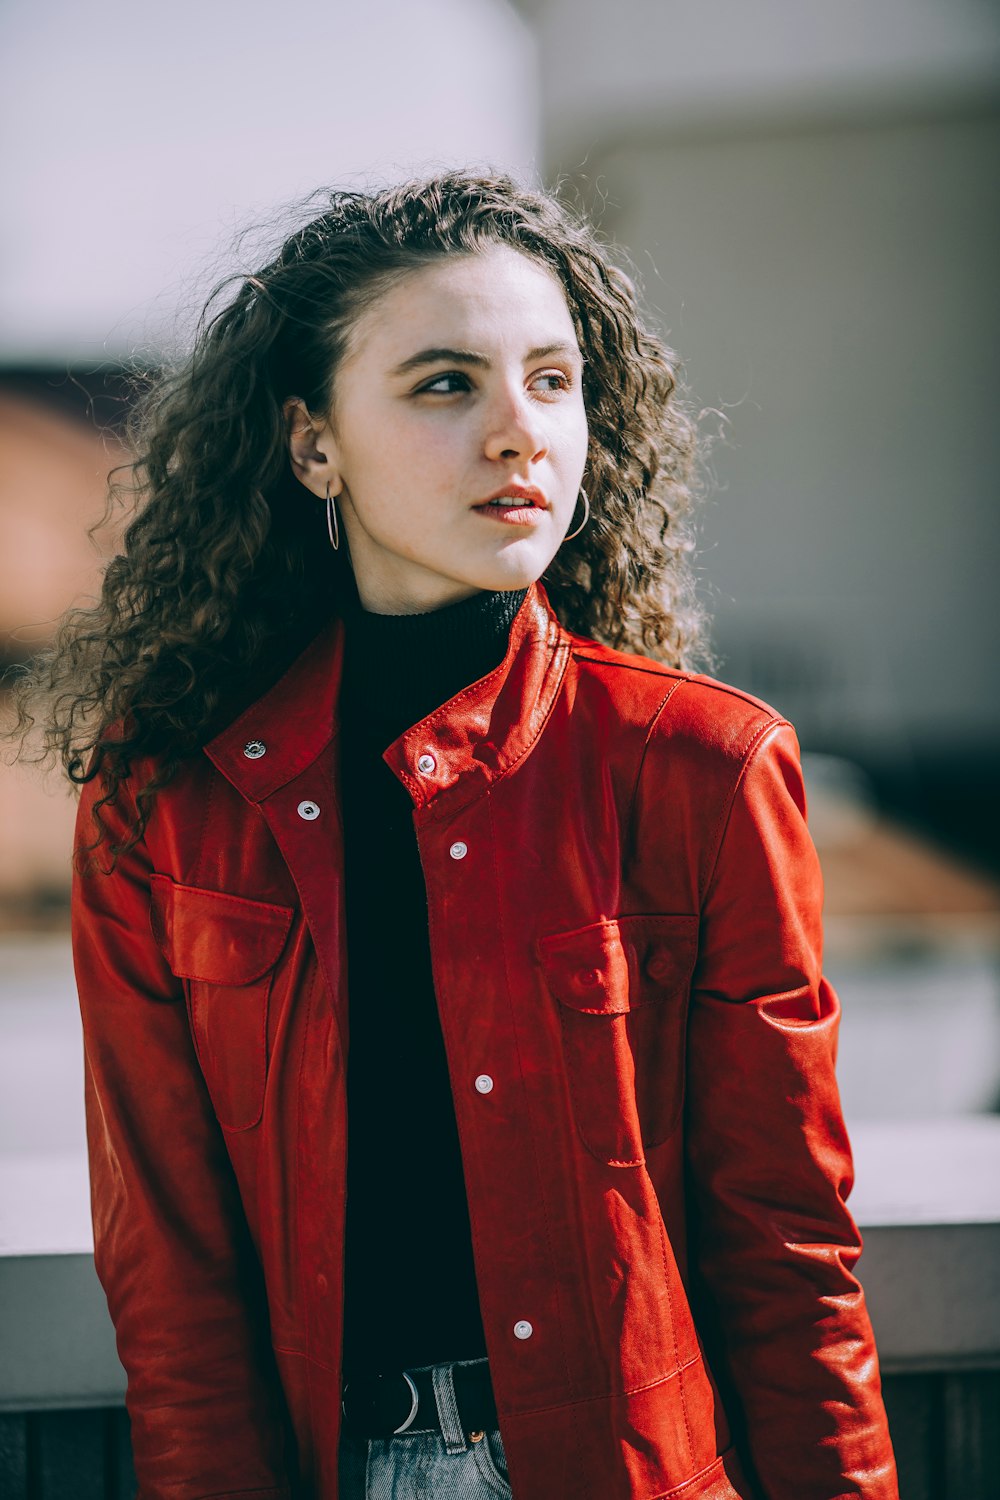 woman wearing red leather jacket